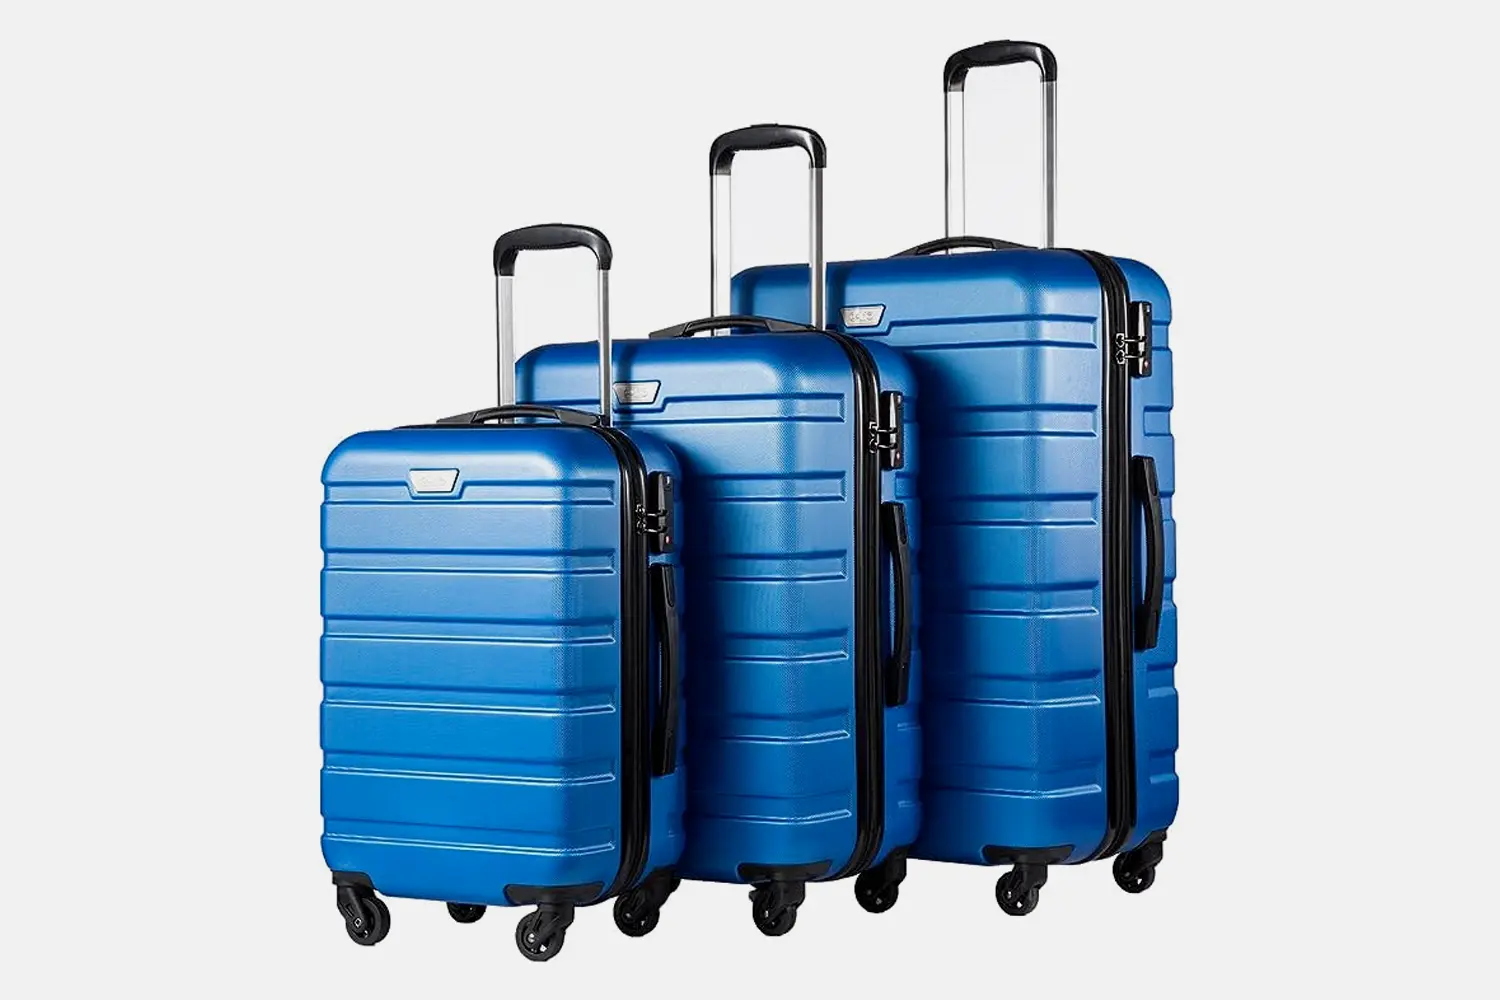 Coolife Spinner Luggage Set - 3 Piece